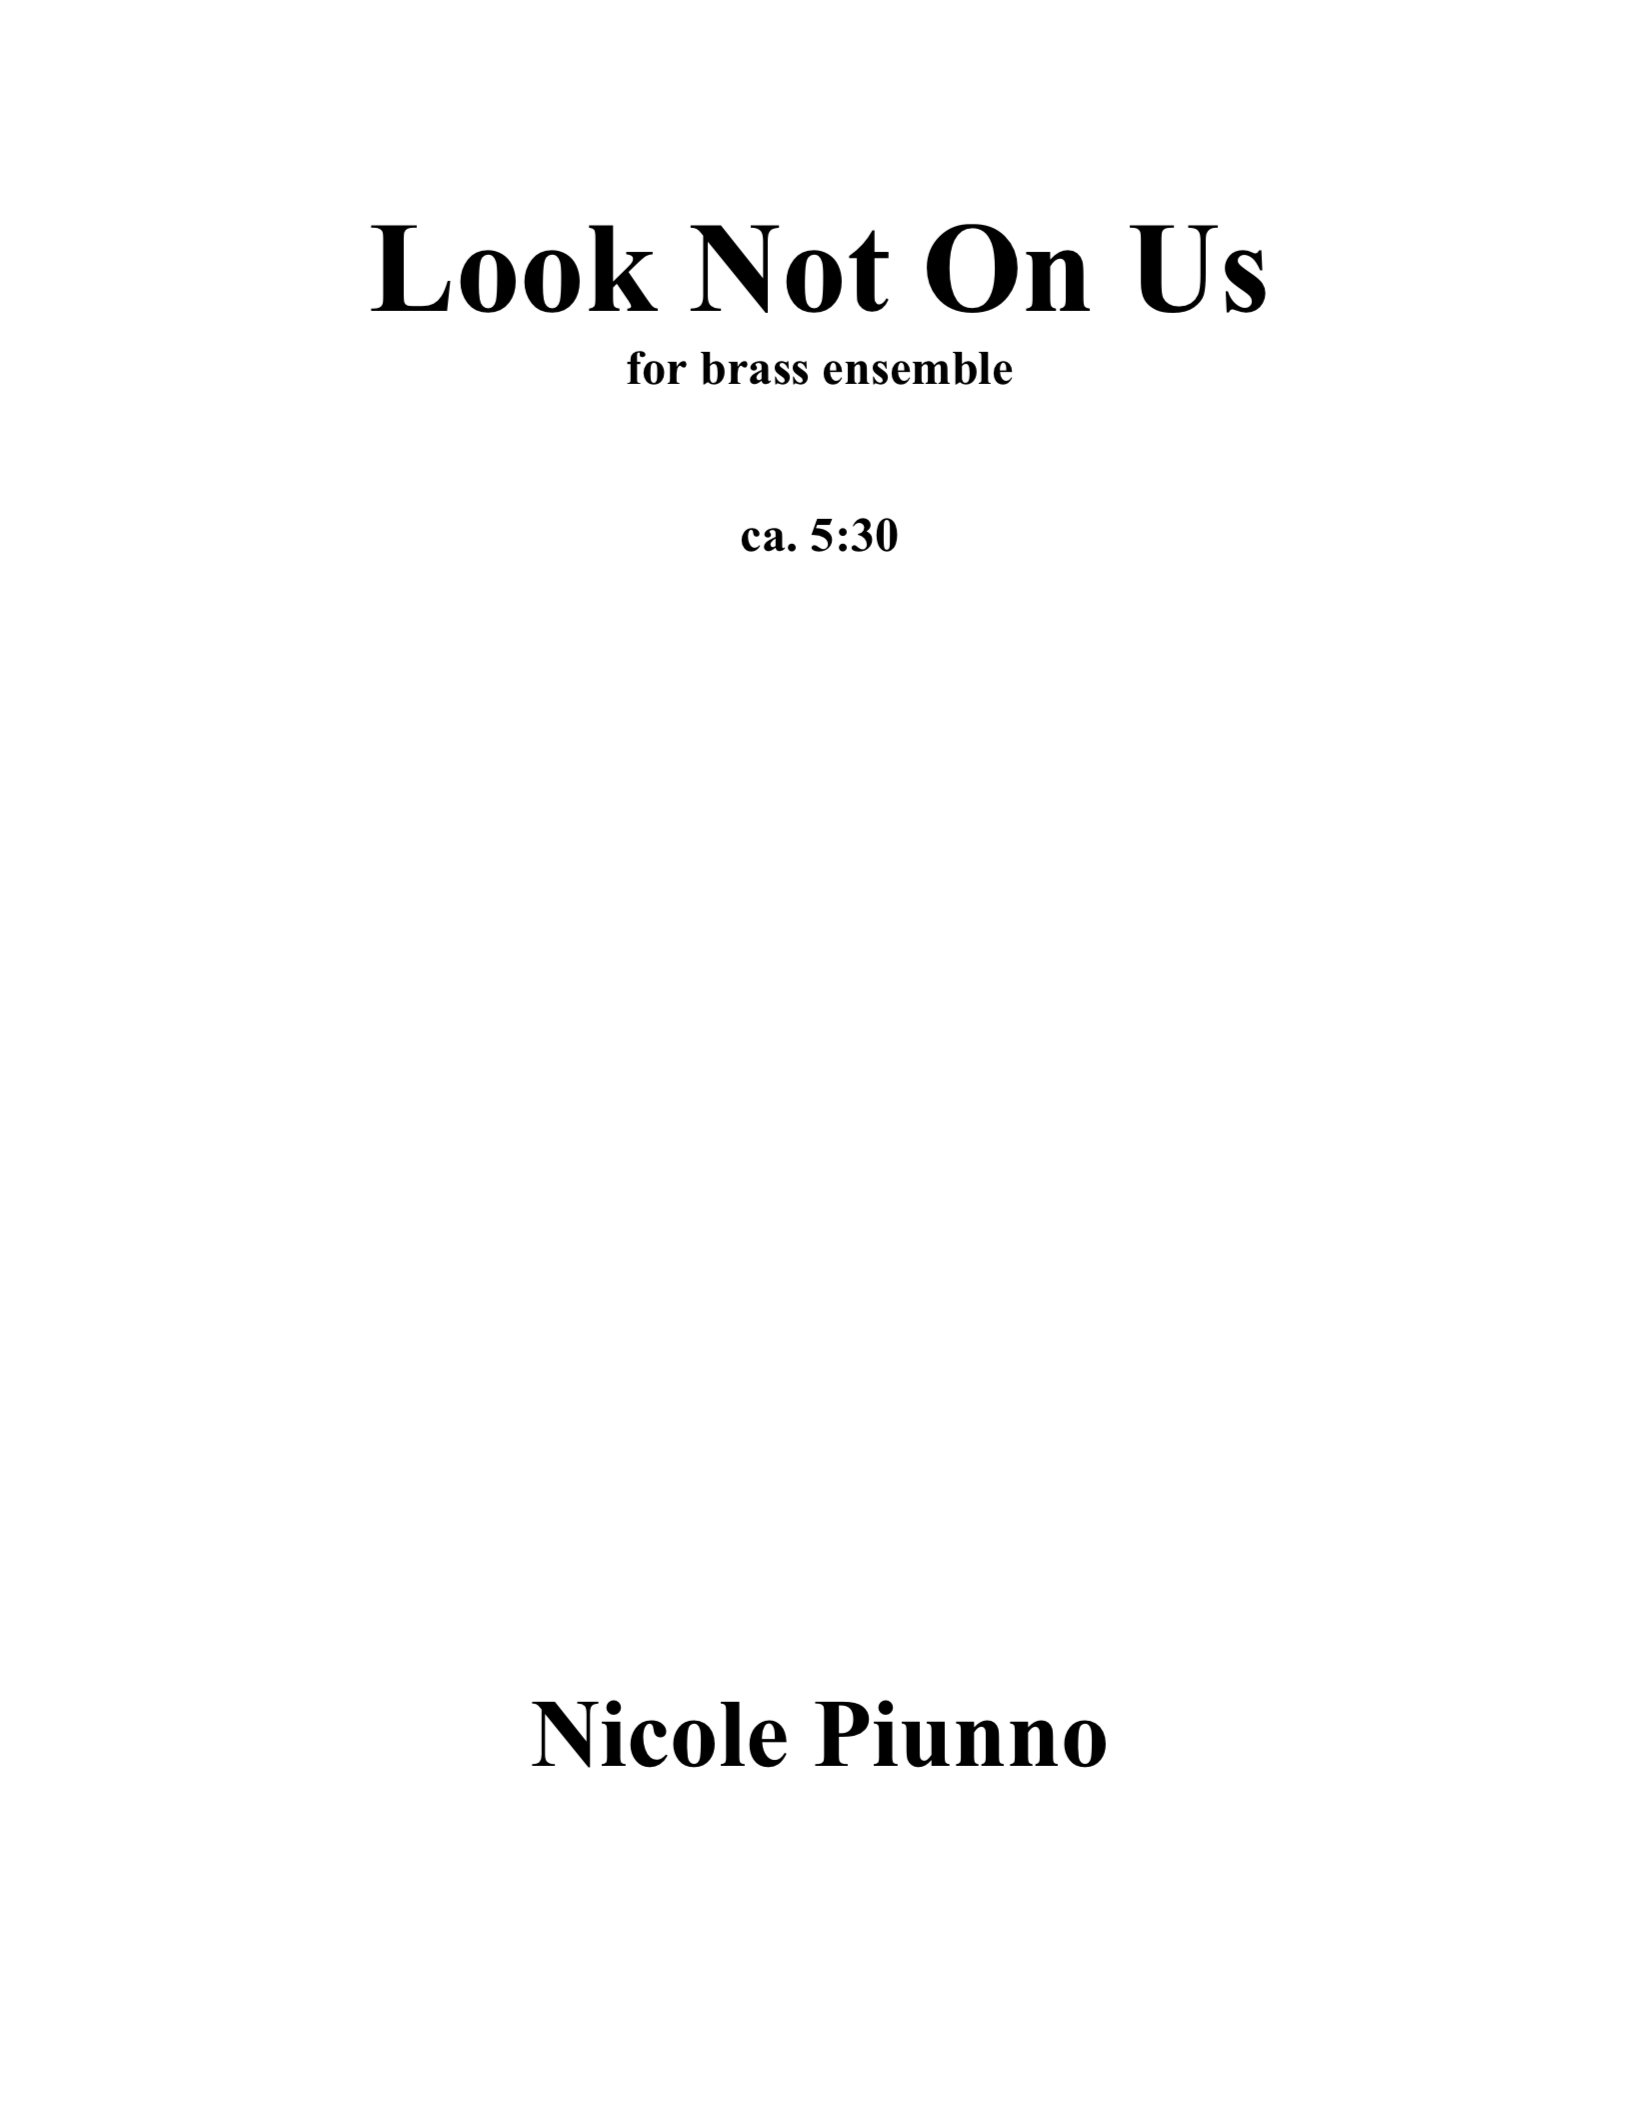 Look Not On Us by Nicole Piunno